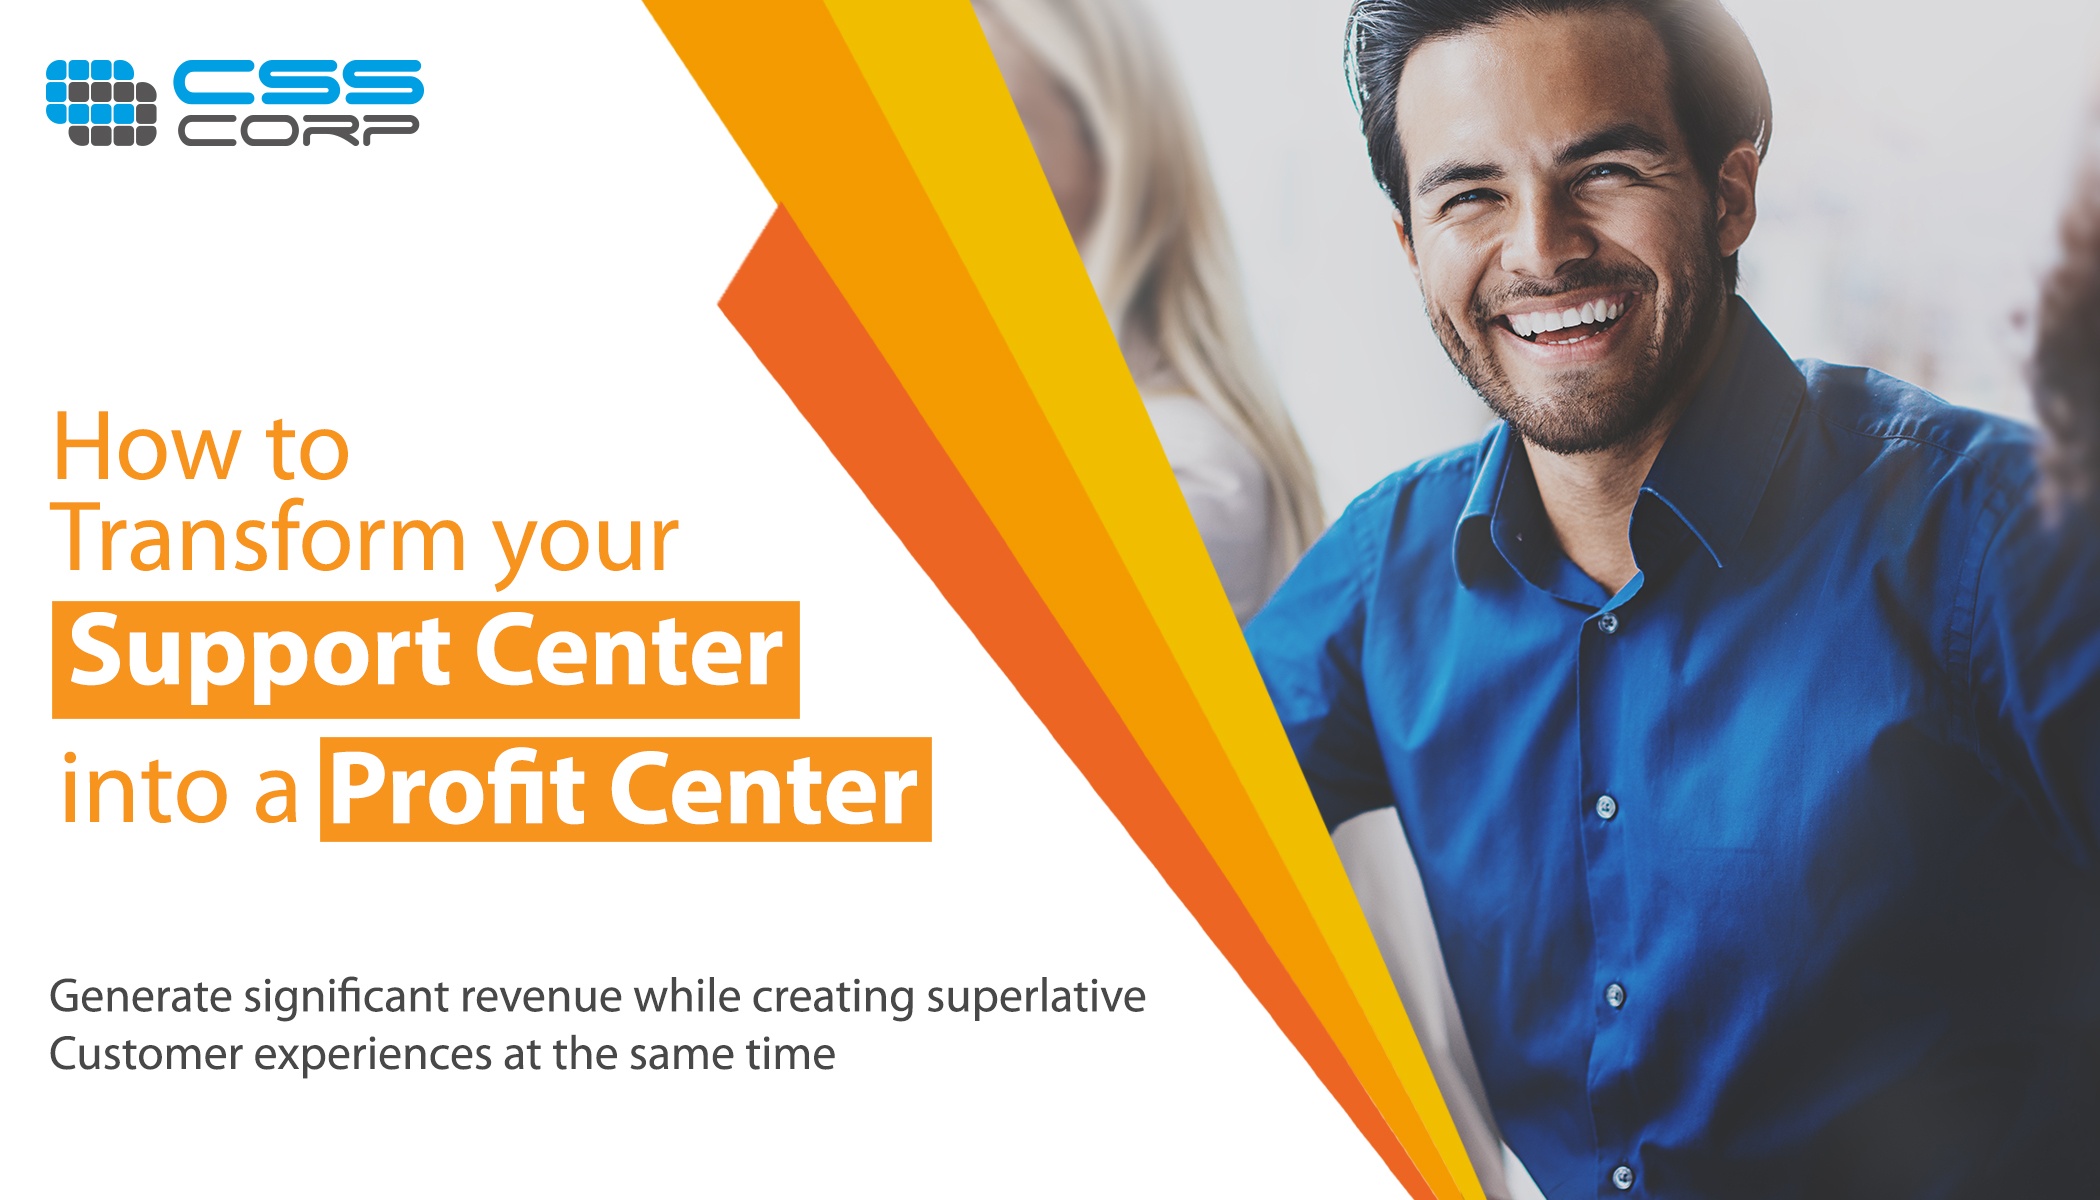 Cost Center to Profit Center